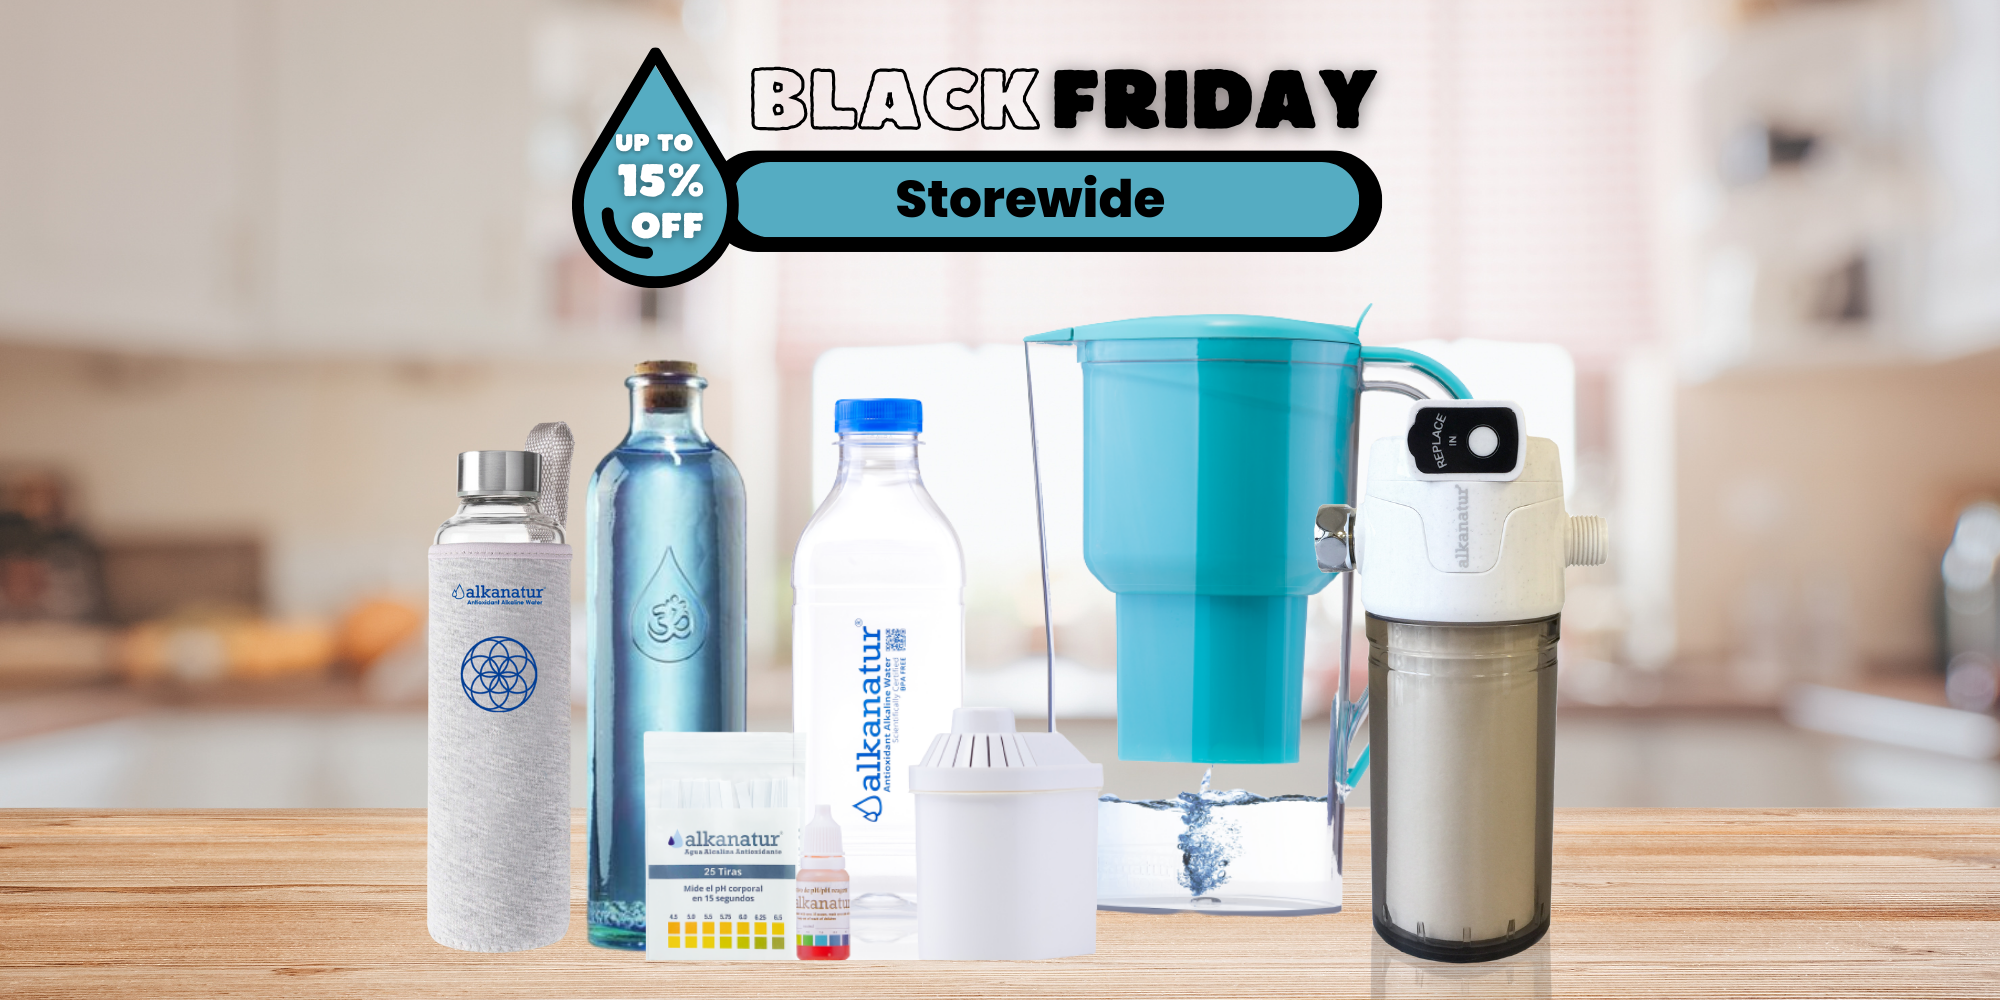 Black Friday cyber monday deals up to 15% off storewide water products filters pitchers jugs shower filter home water filtration system